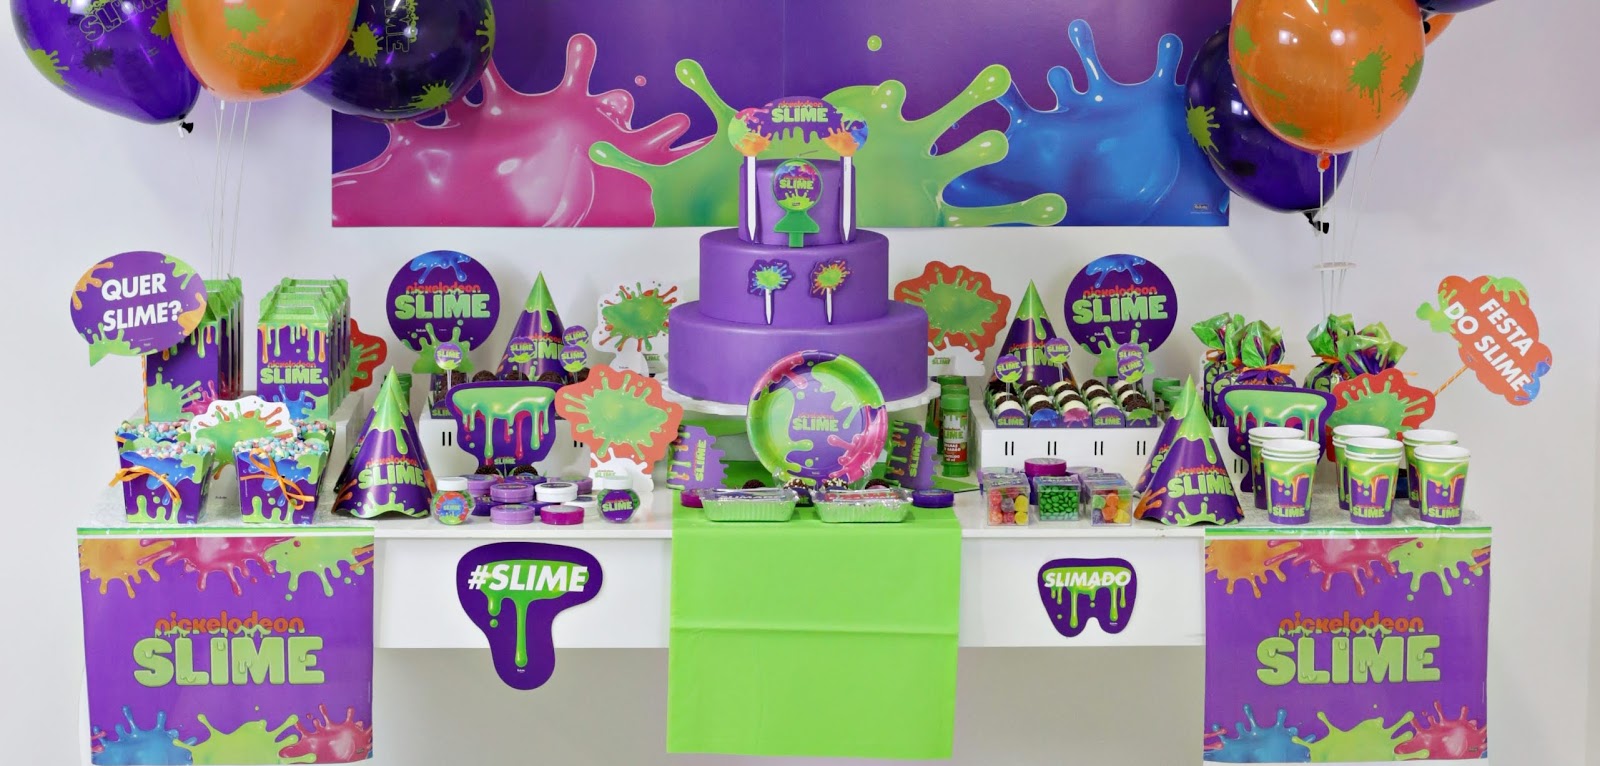 Slime Party Decorations  Slime party, Slime birthday, Party decorations